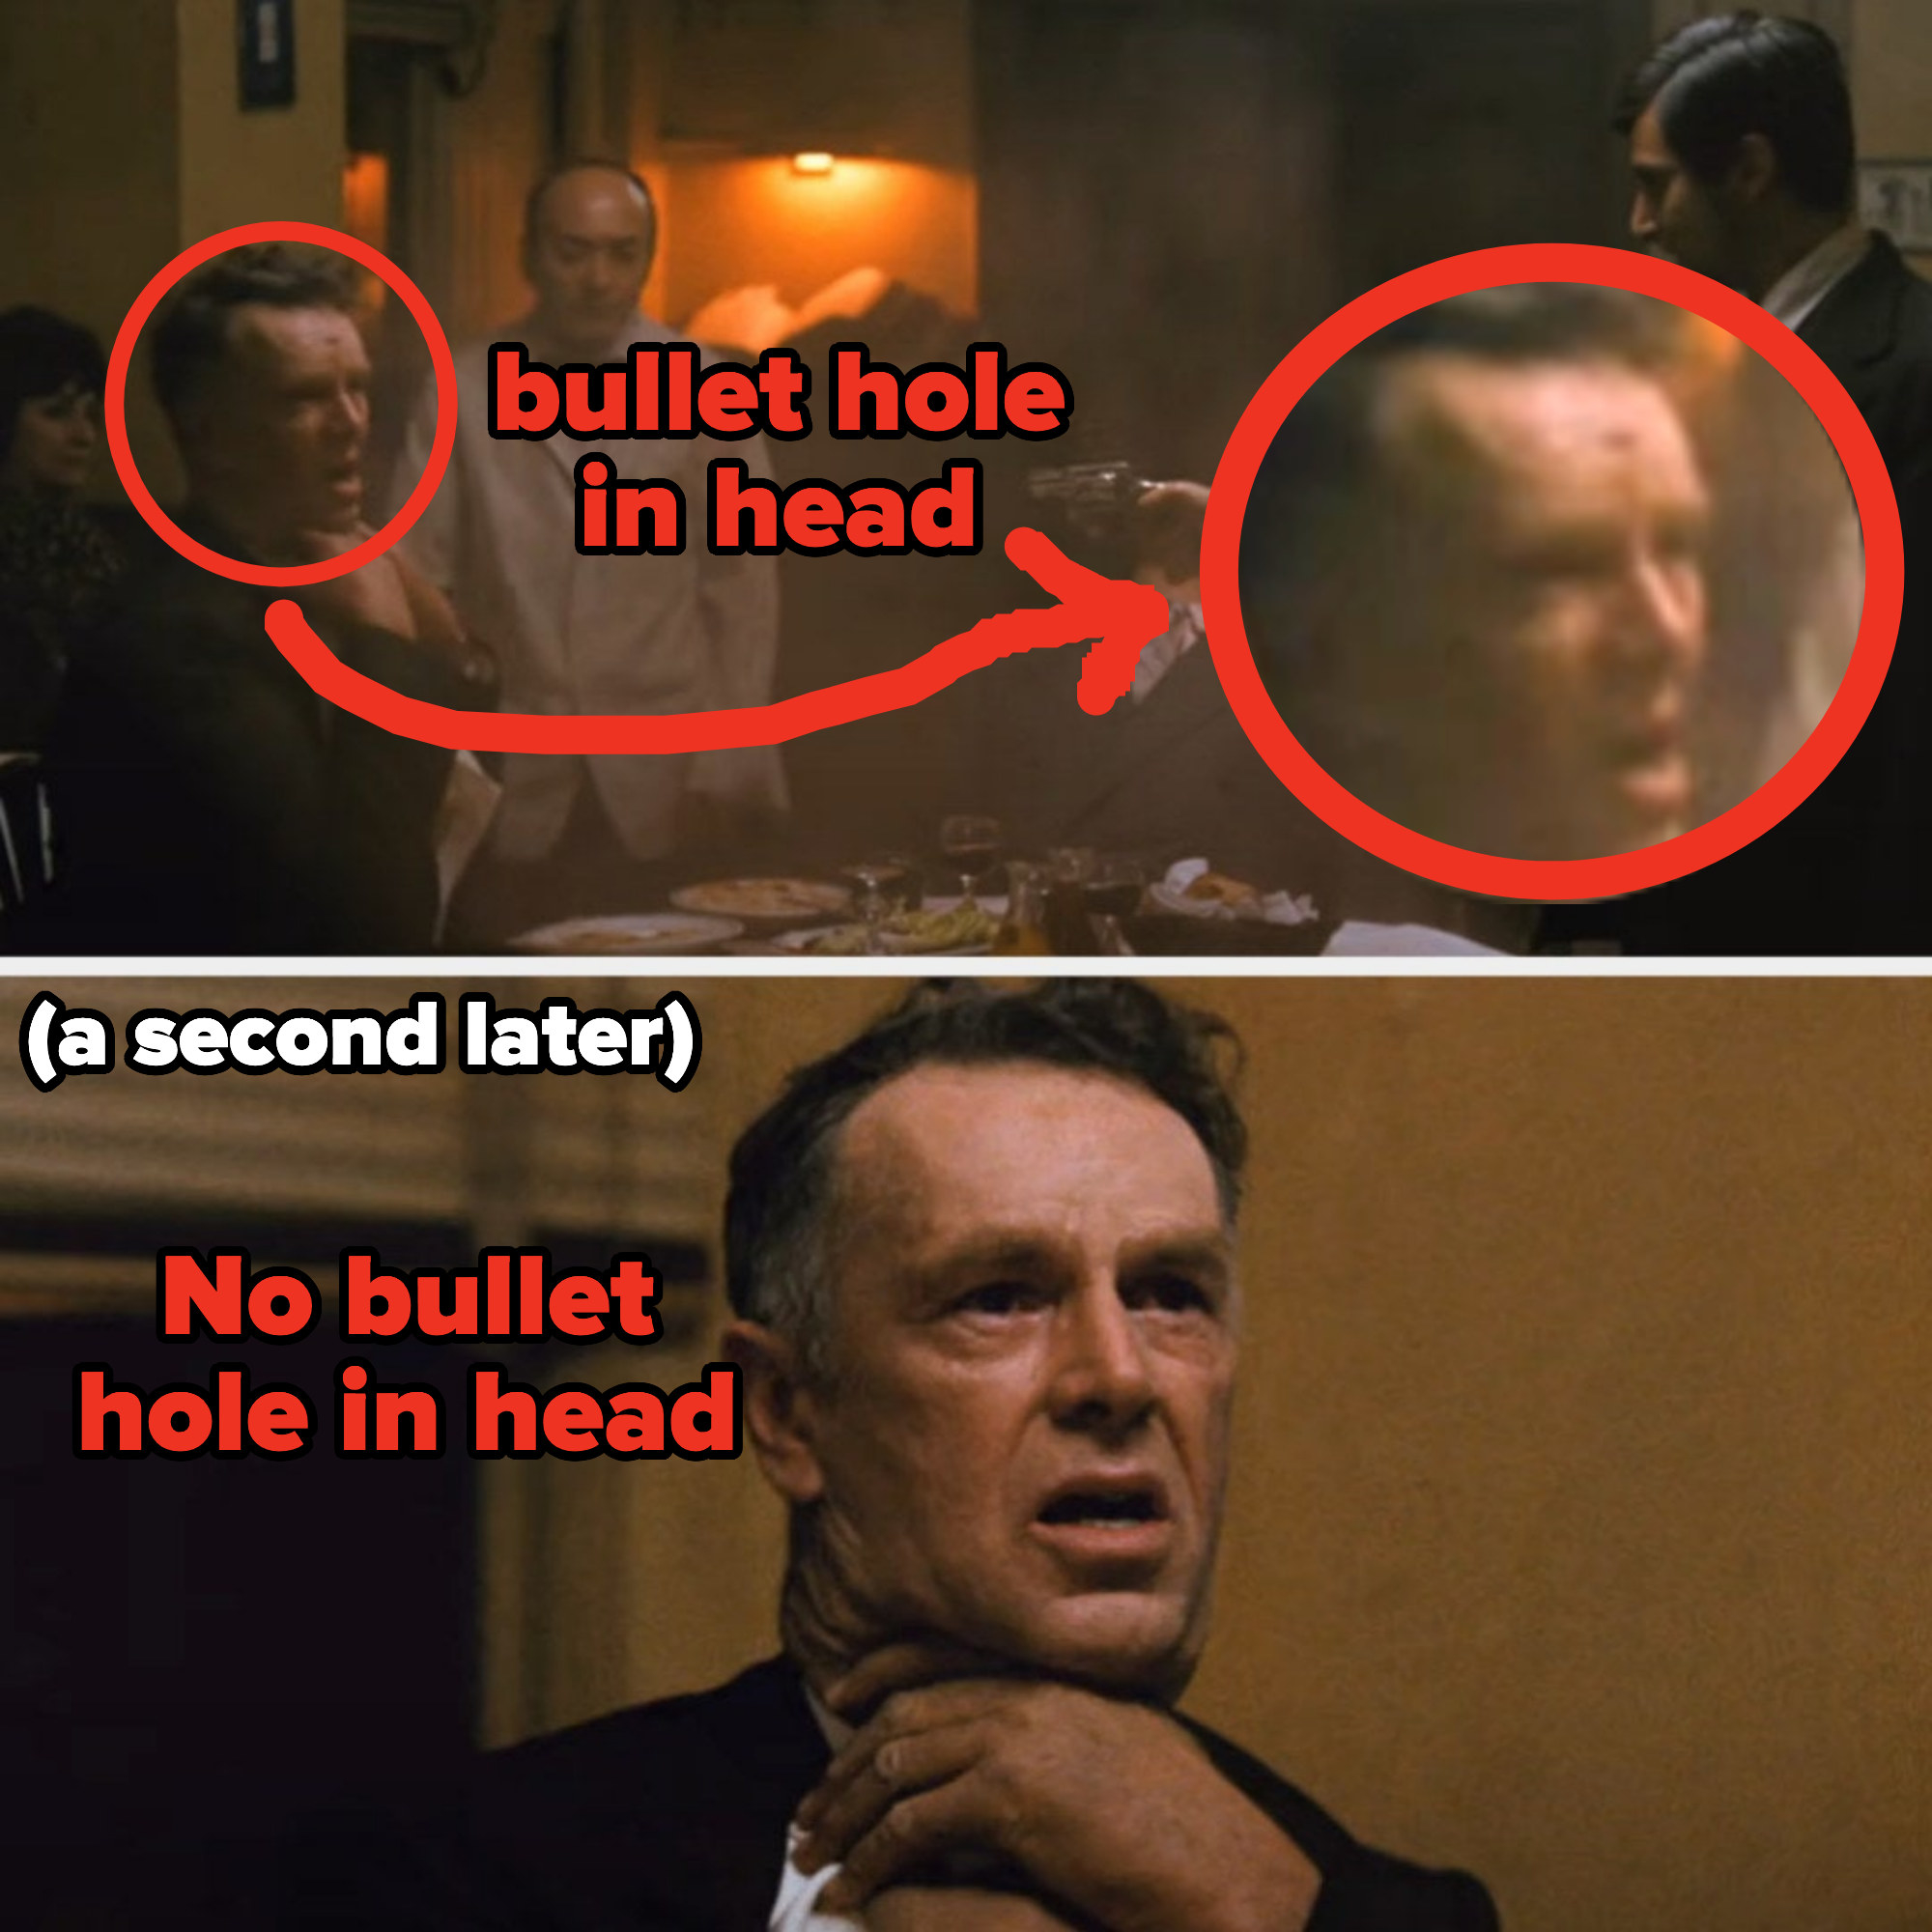 The character has a bullet hole in their forehead at the start of the scene, then the hole disappears as the character grasps his throat